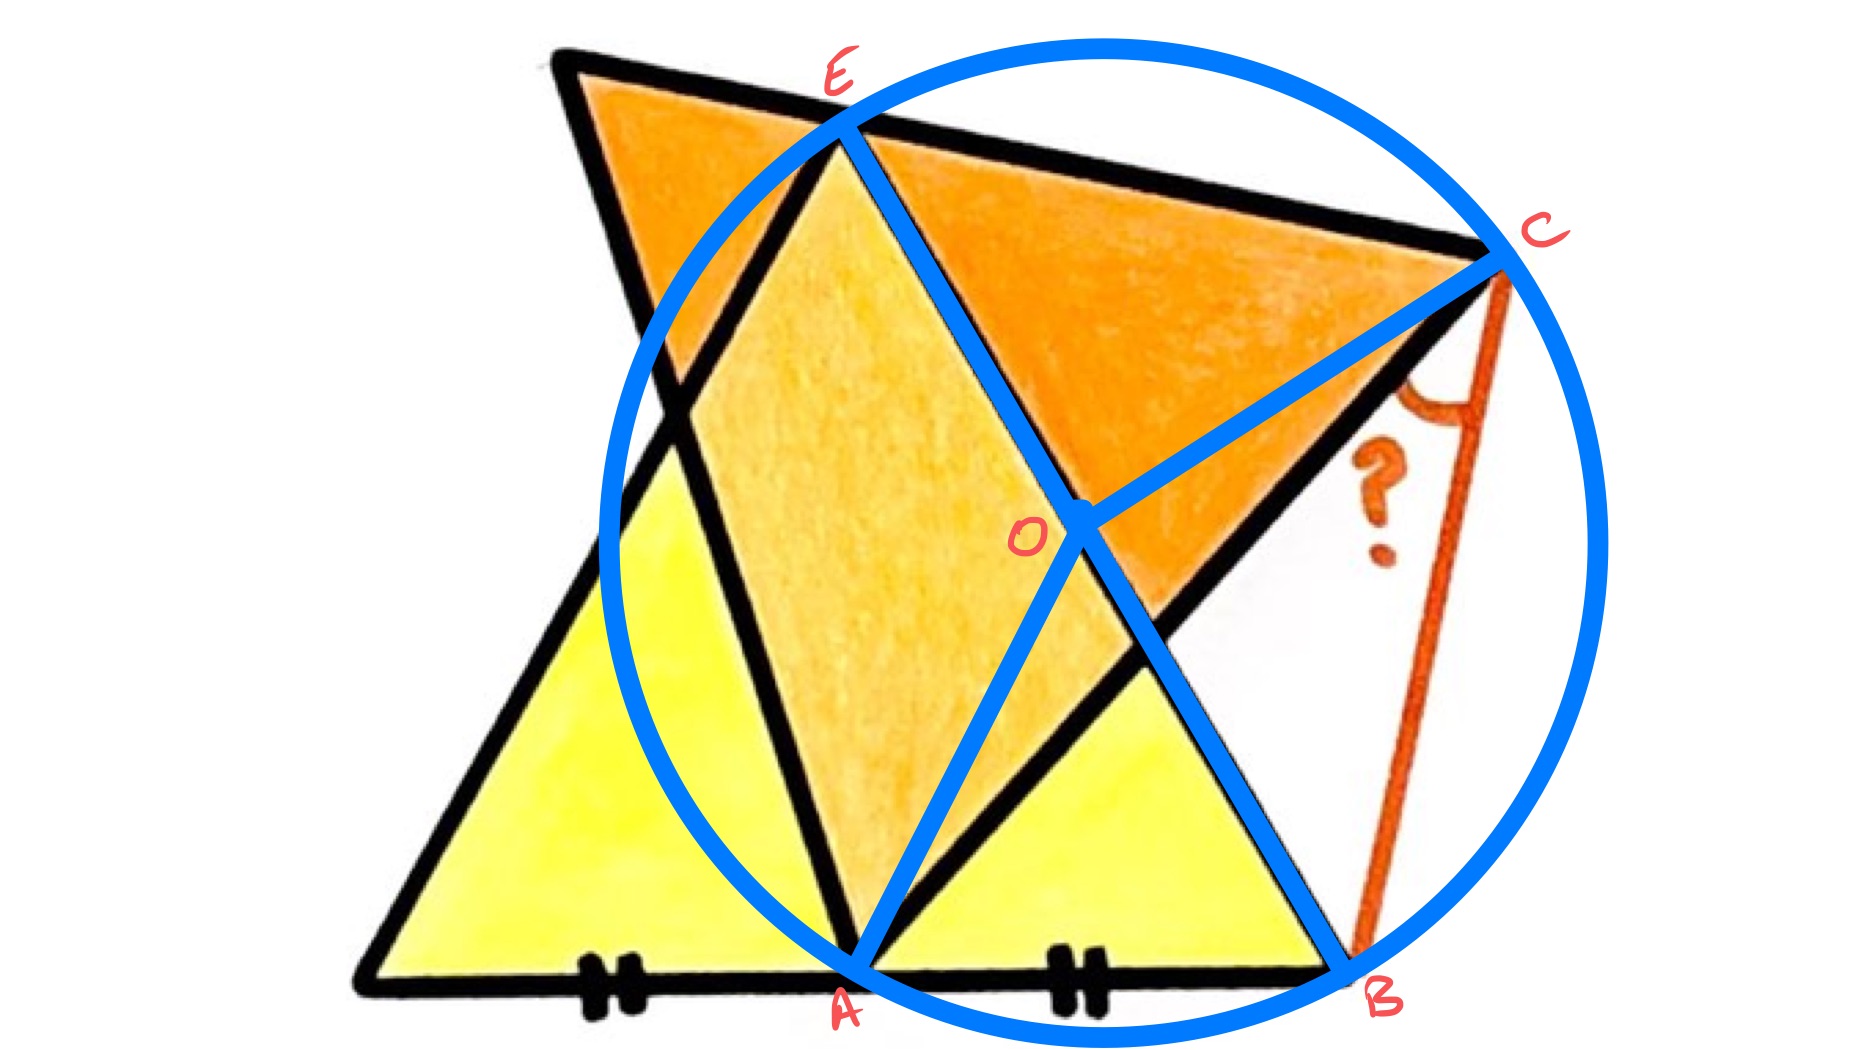 Two overlapping triangles circled